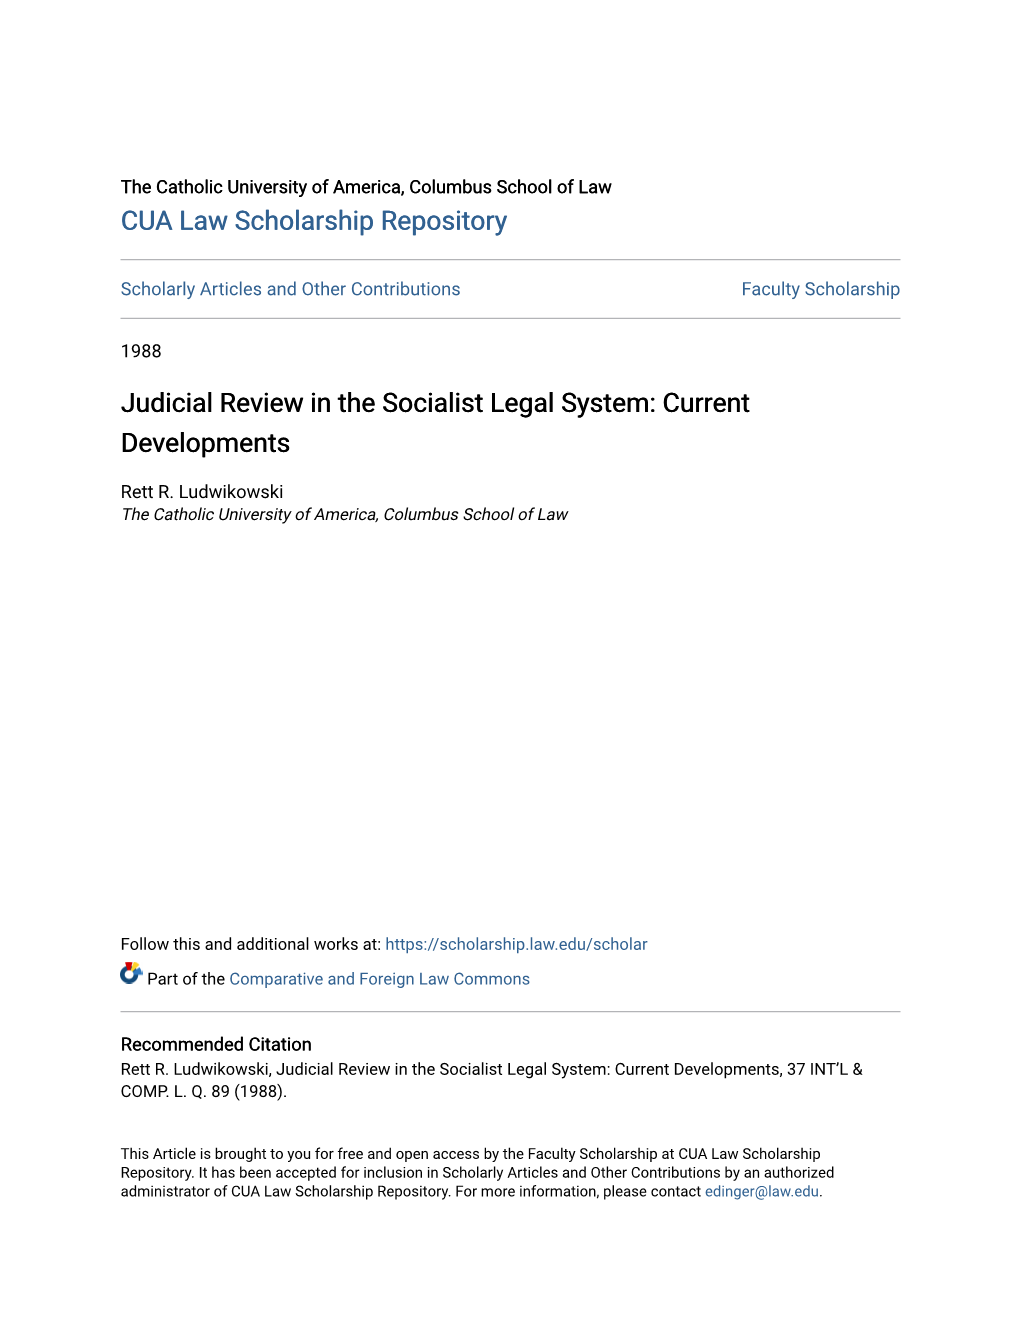 Judicial Review in the Socialist Legal System: Current Developments